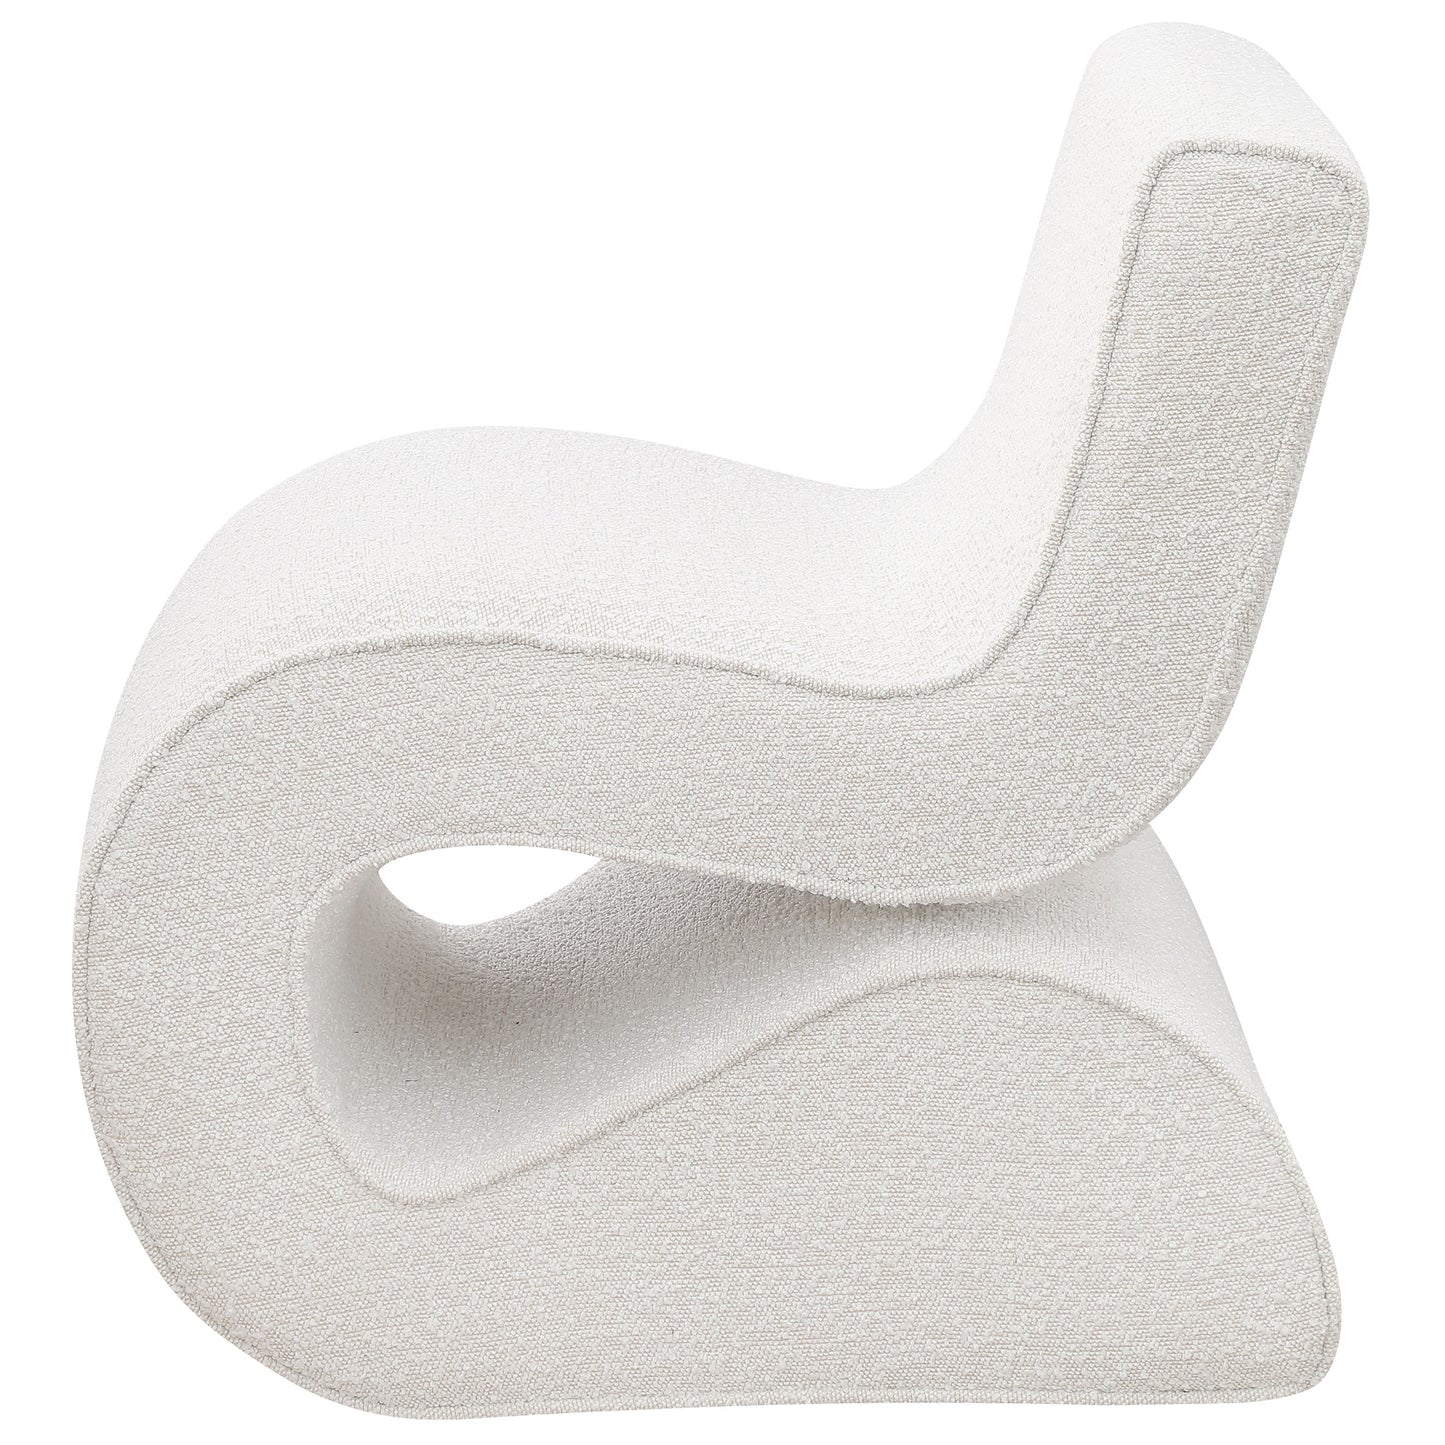 Ronea Boucle Upholstered Armless Curved Accent Chair Cream